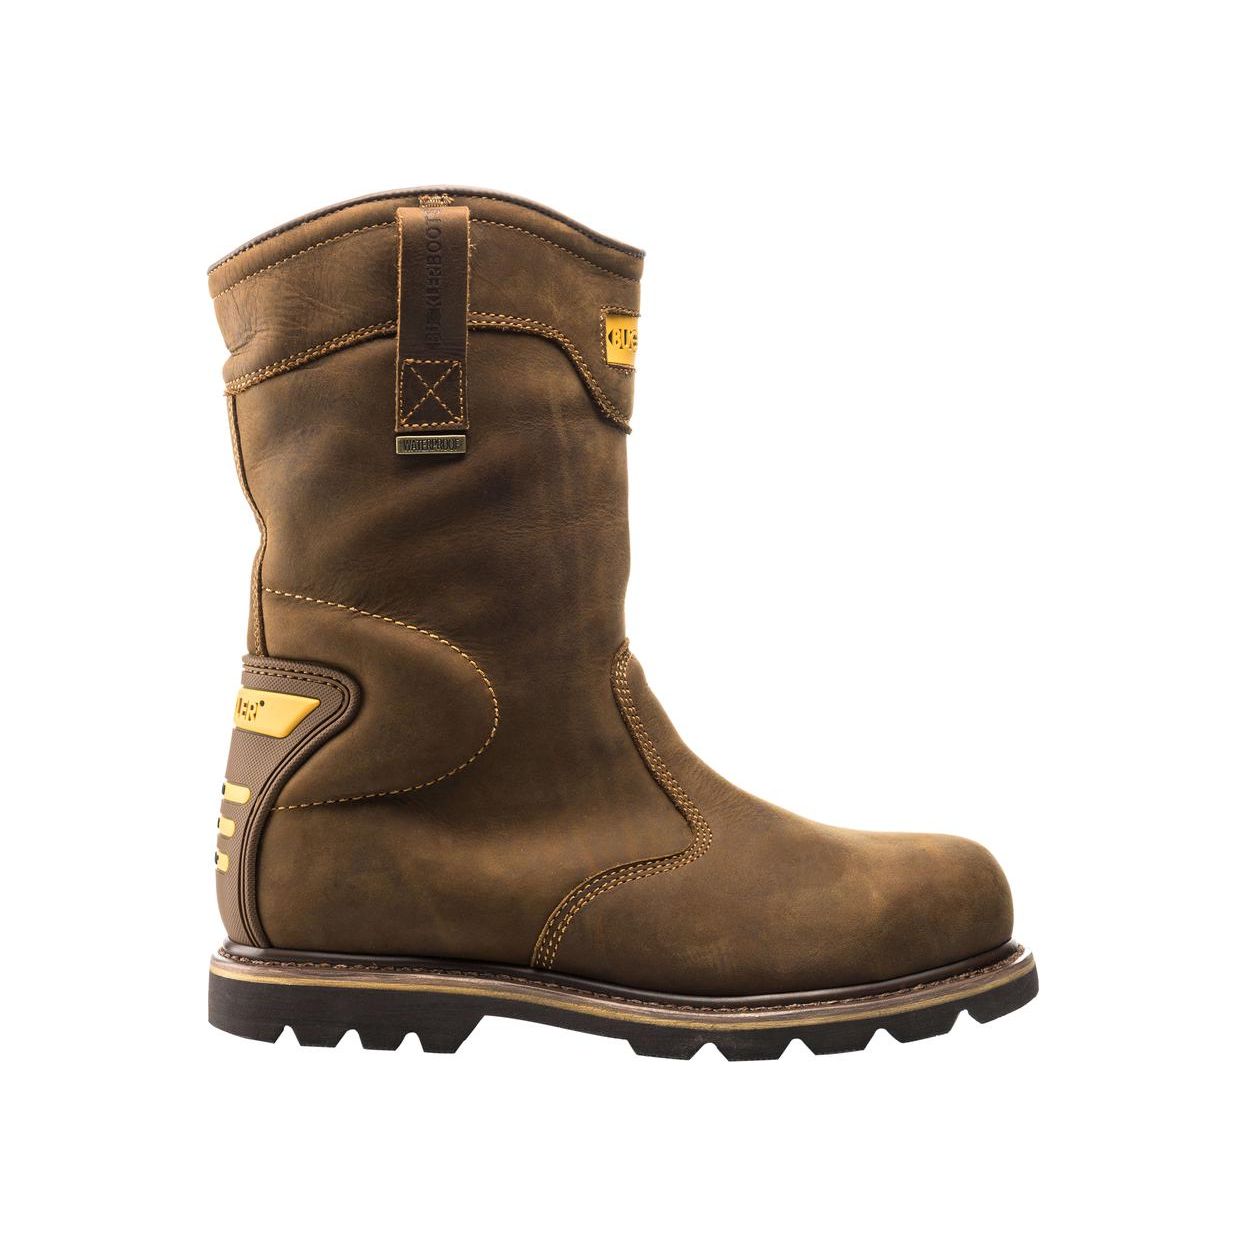 Buckler Boots B701SMWP Safety Rigger Boots Waterproof Buckbootz Brown Image 2#colour_brown